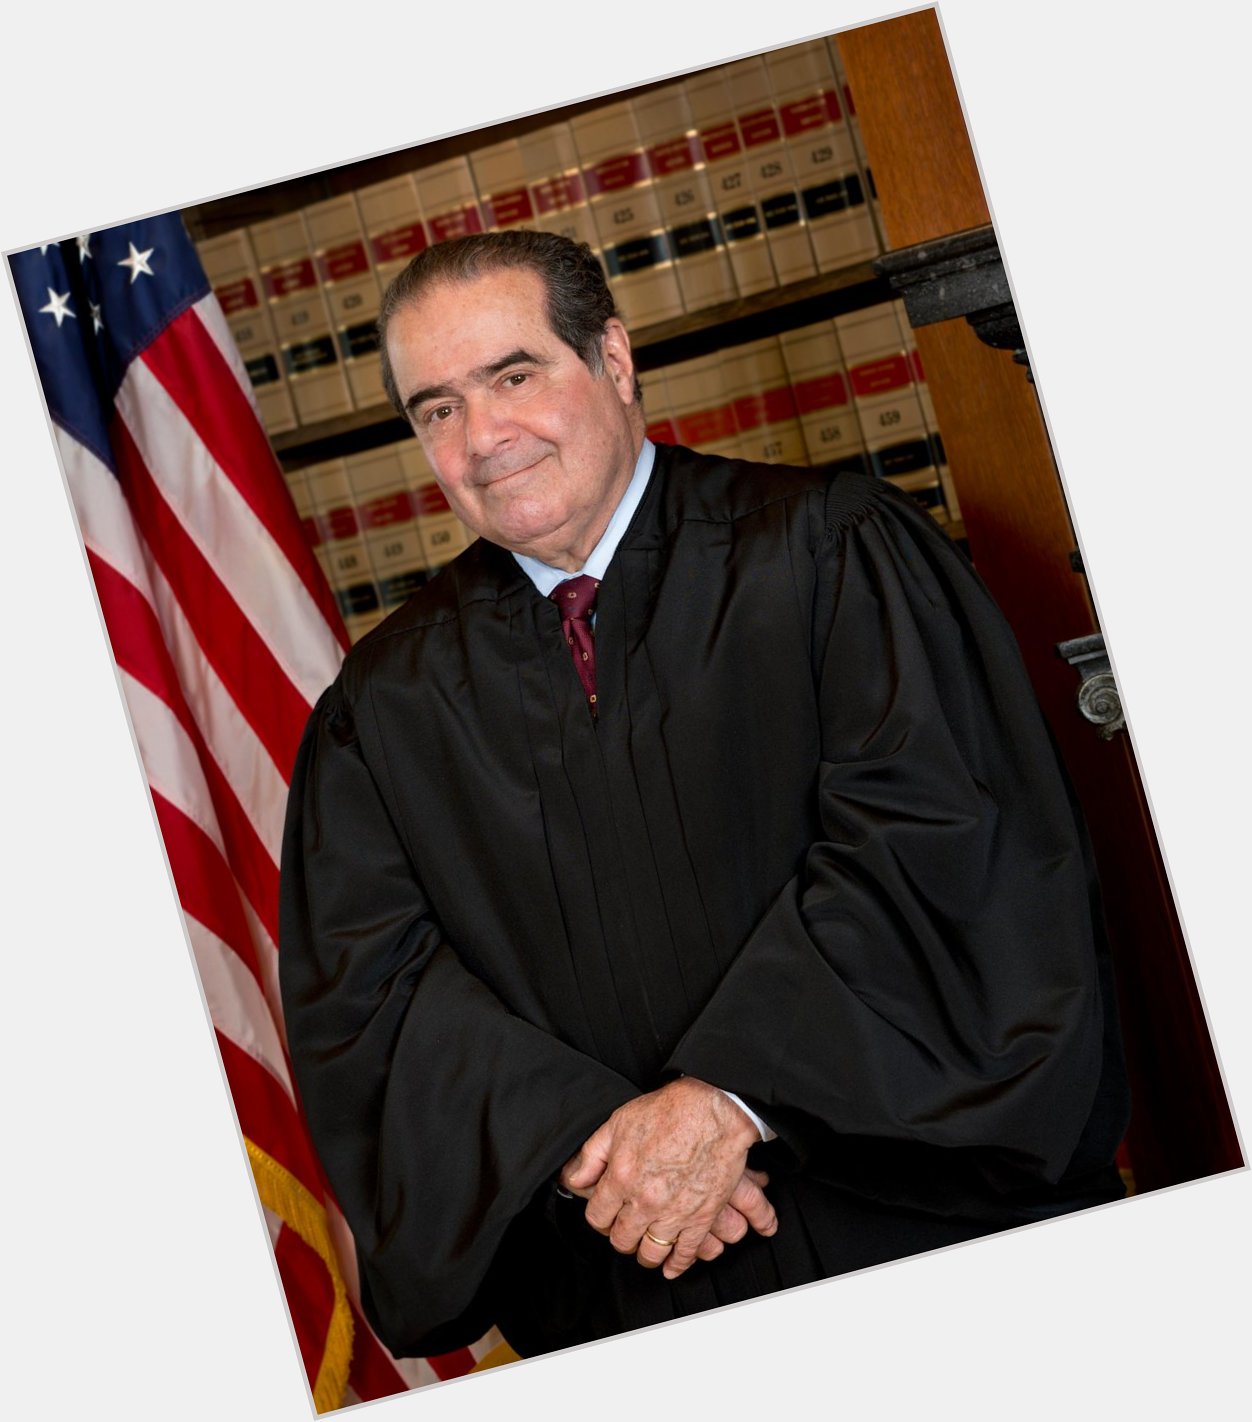 Built & Served, & happy birthday to the giant, Justice Antonin Scalia, the longest serving US Supreme Court Justice ! 